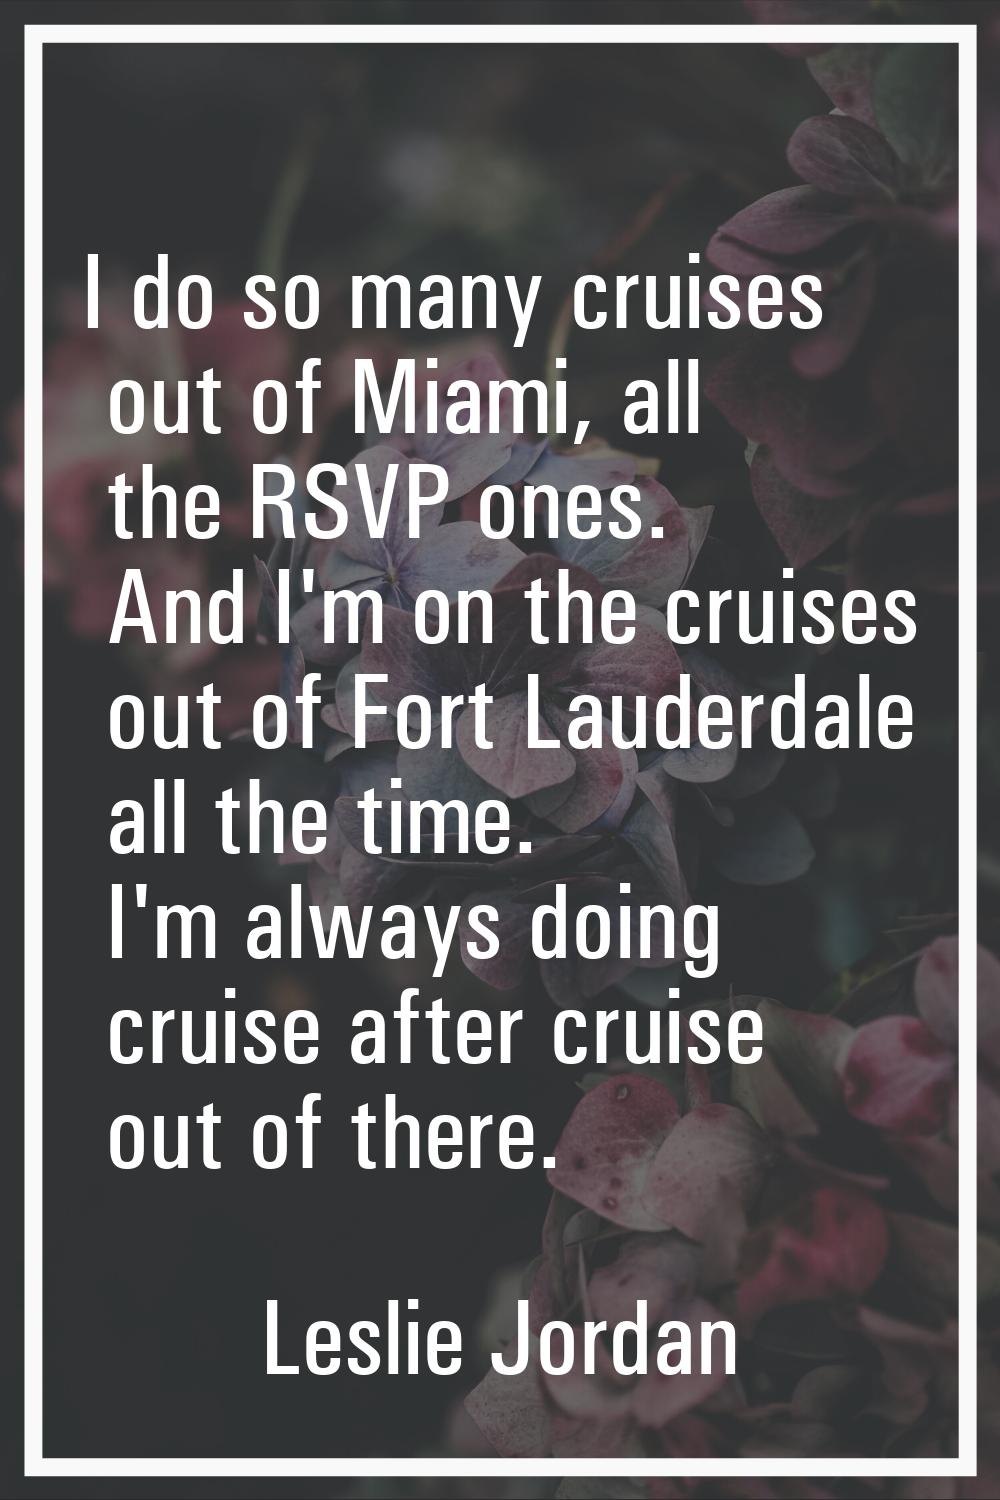 I do so many cruises out of Miami, all the RSVP ones. And I'm on the cruises out of Fort Lauderdale